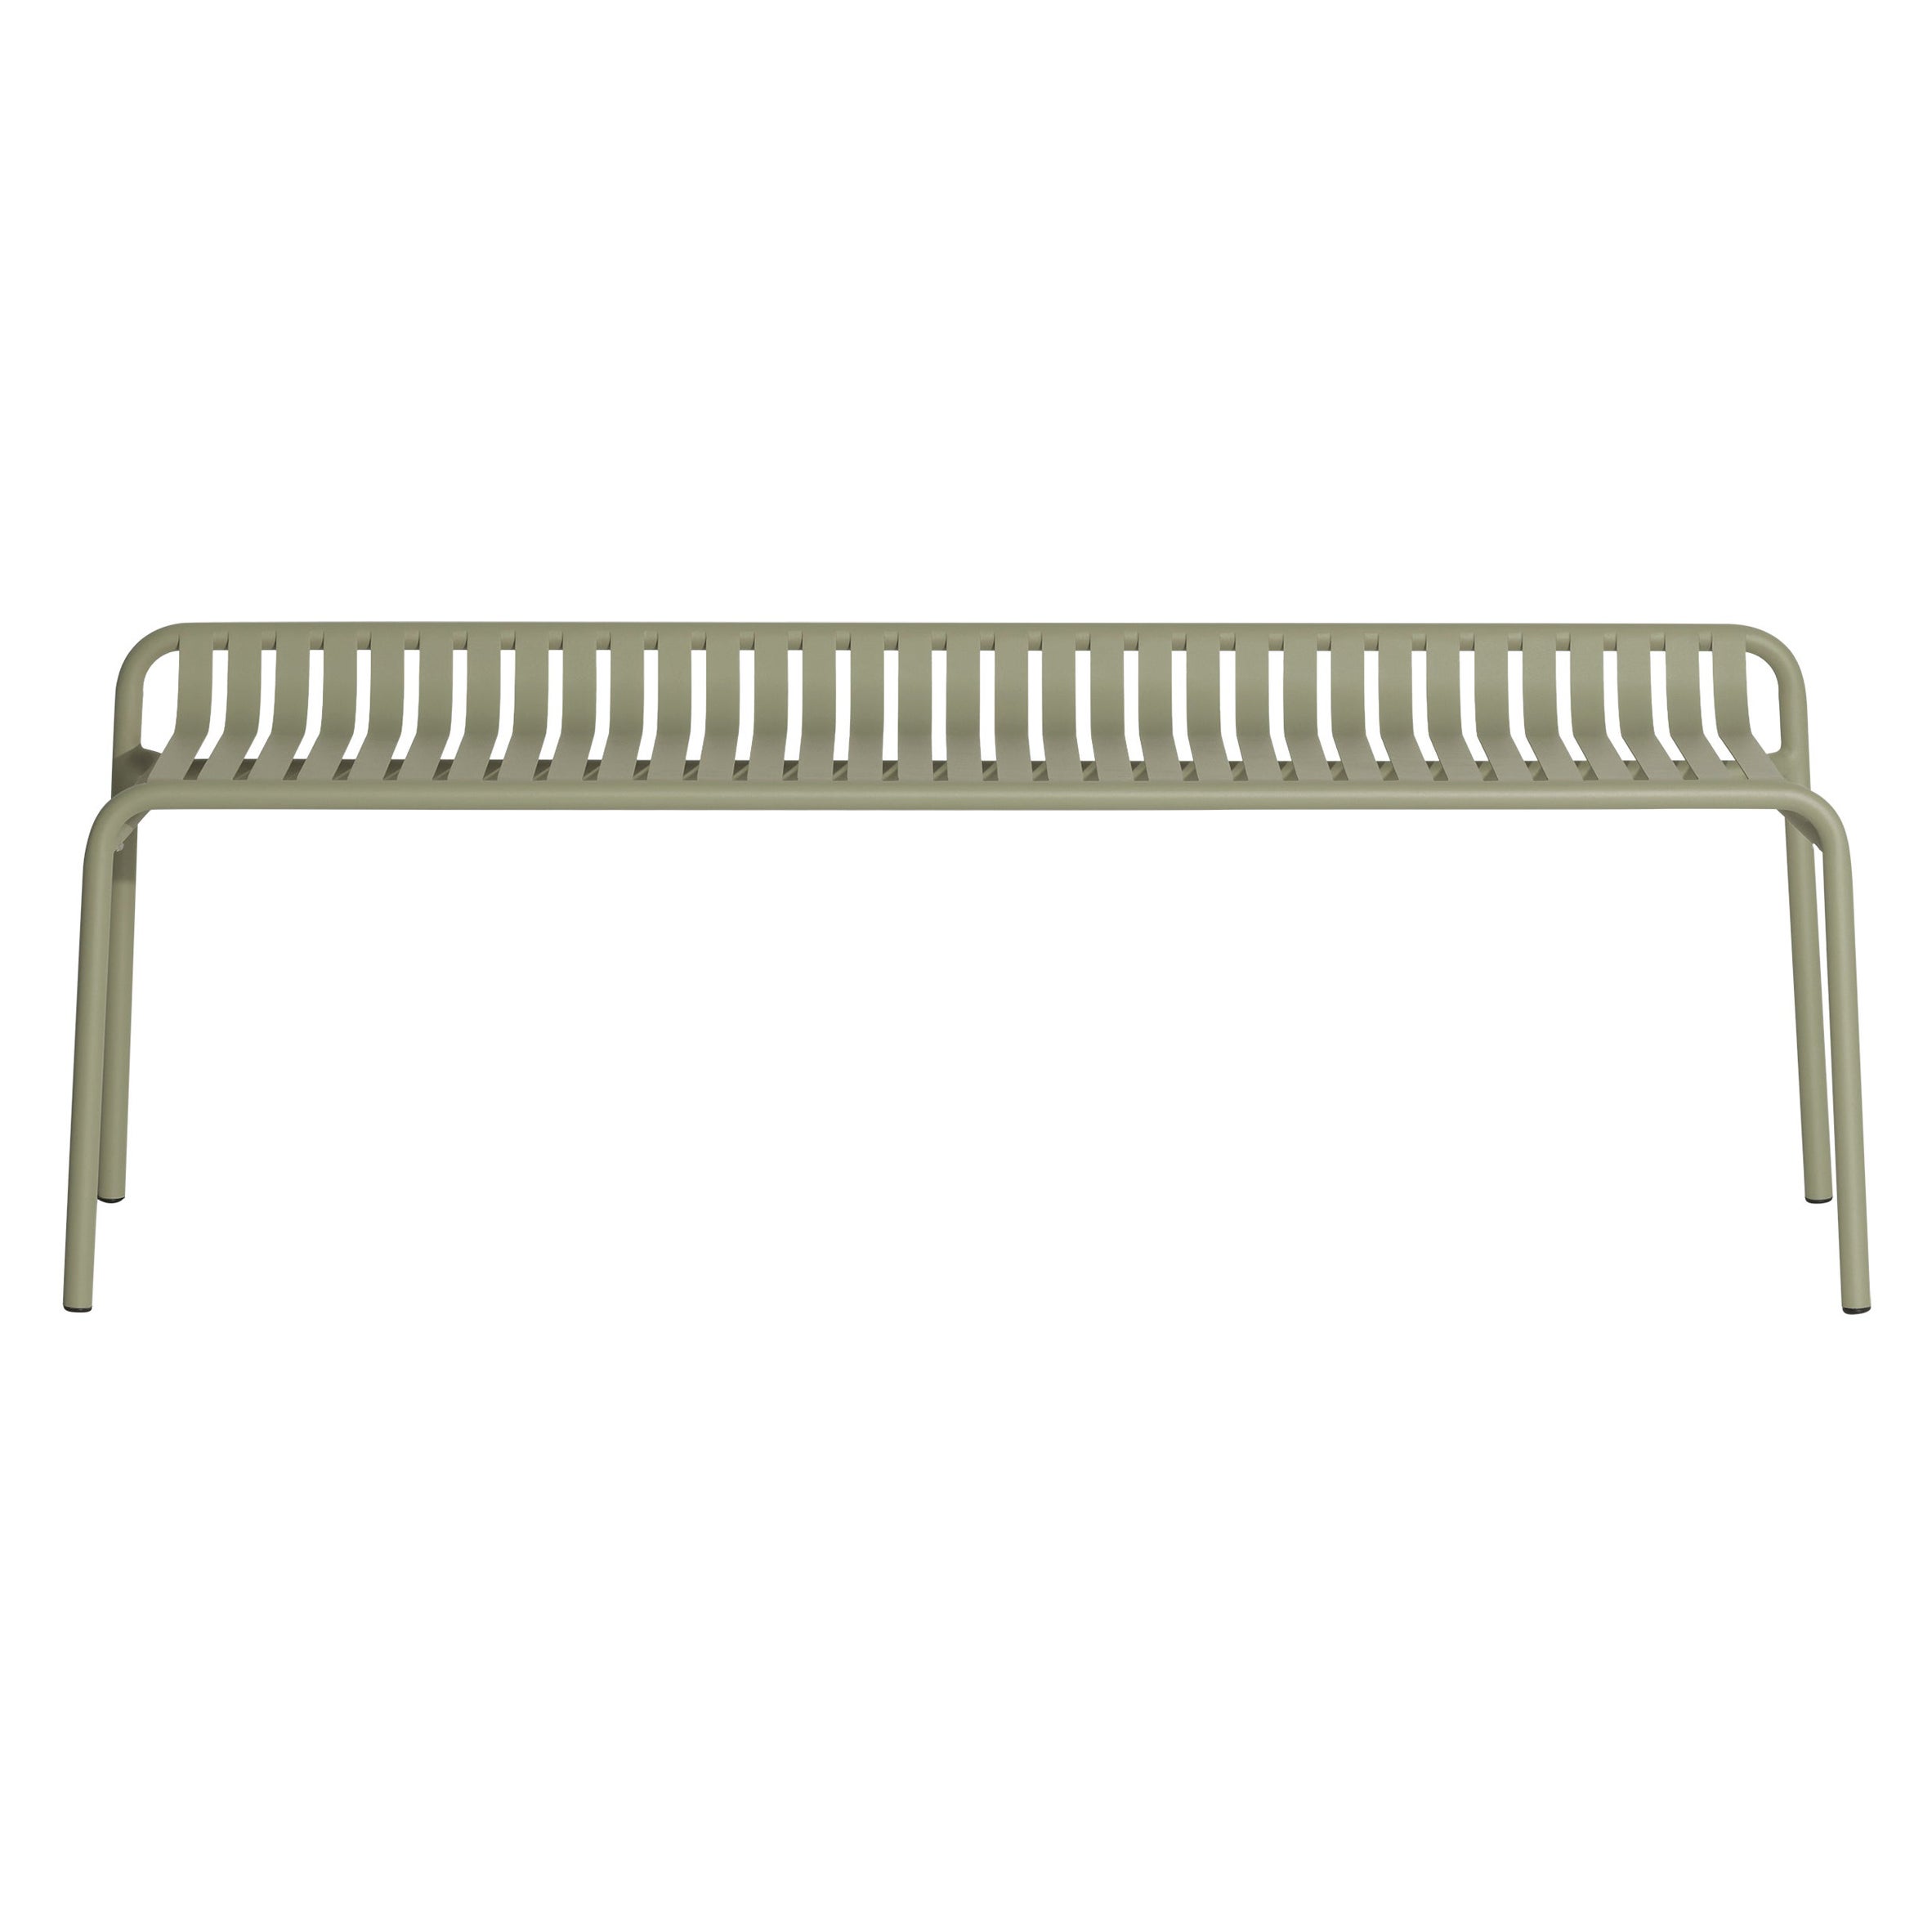 Petite Friture Week-End Bench without Back in Jade Green Aluminium, 2017  For Sale